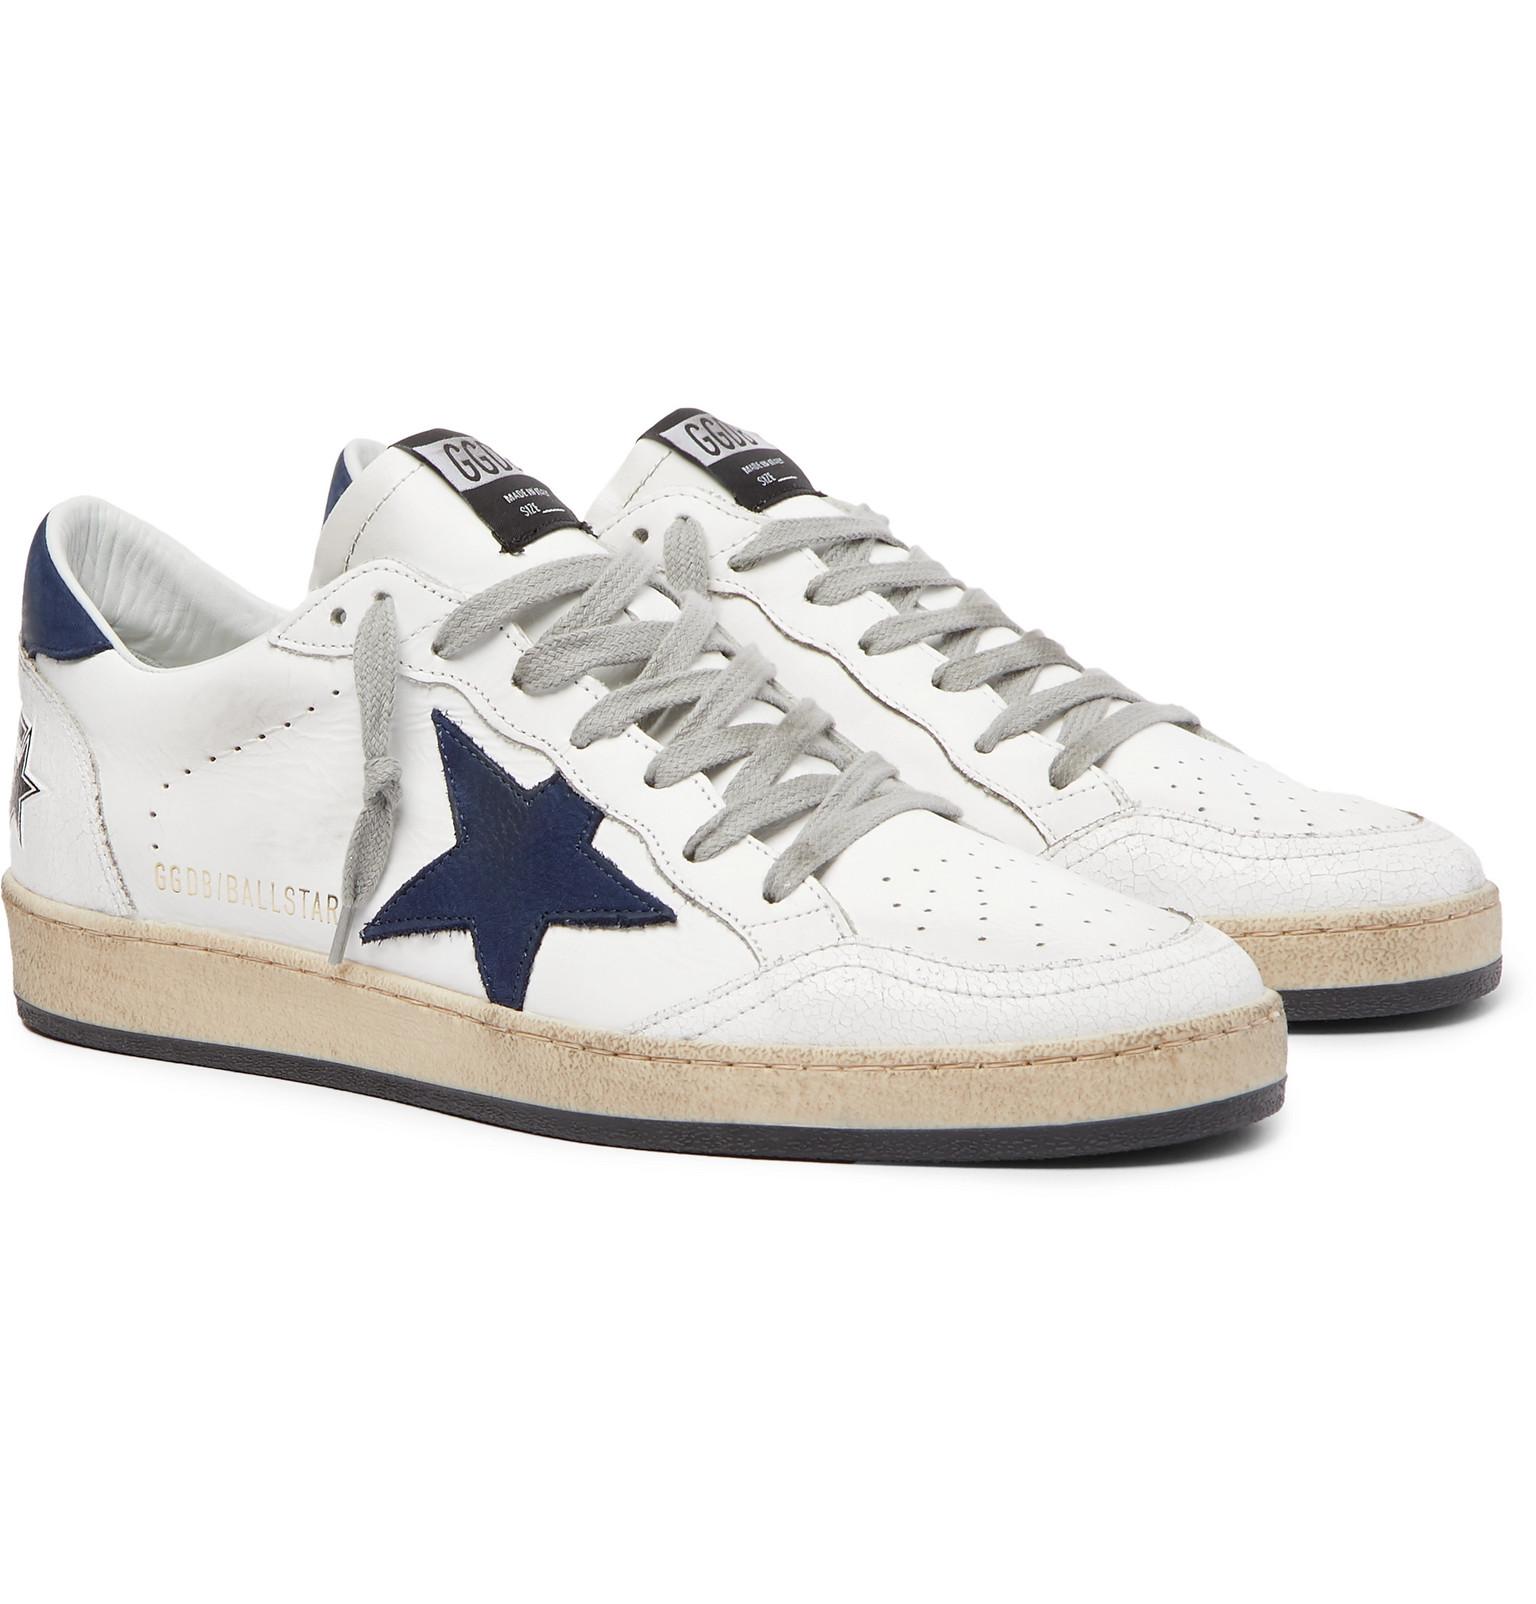 Golden Goose Deluxe Brand Ball Star Distressed Leather Sneakers in ...